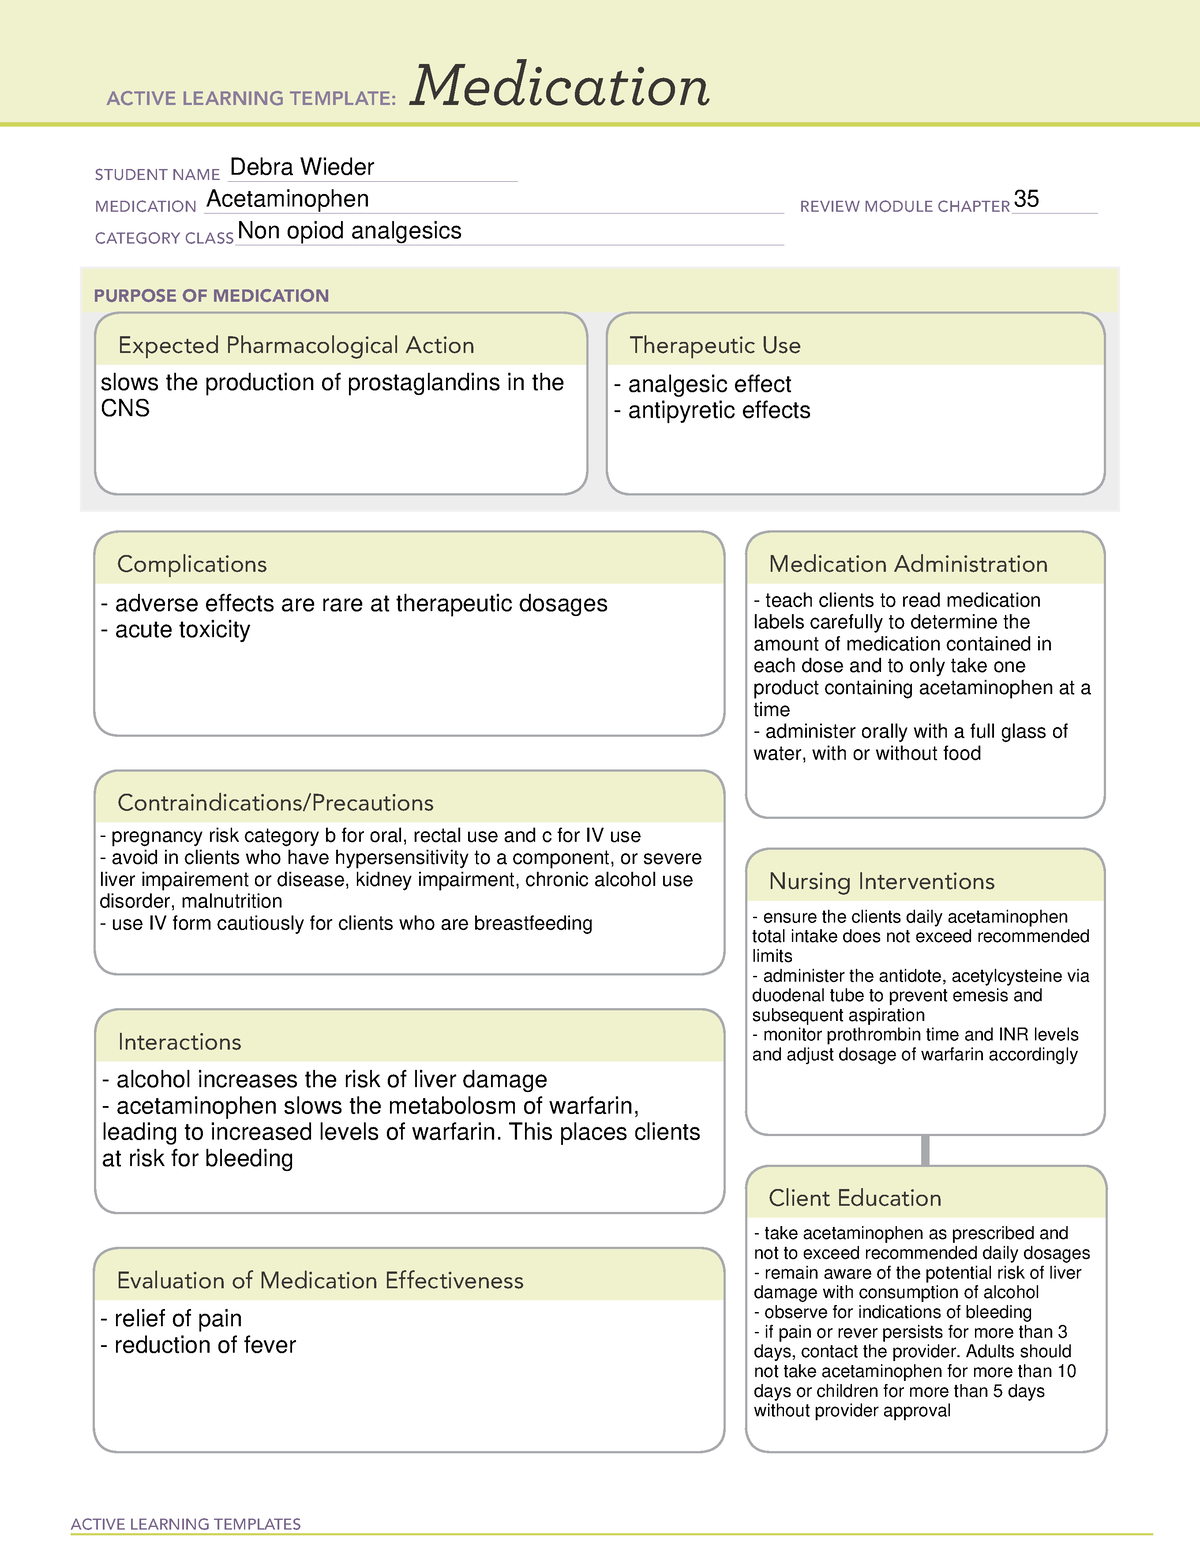 Acetaminophen medication template ACTIVE LEARNING TEMPLATES